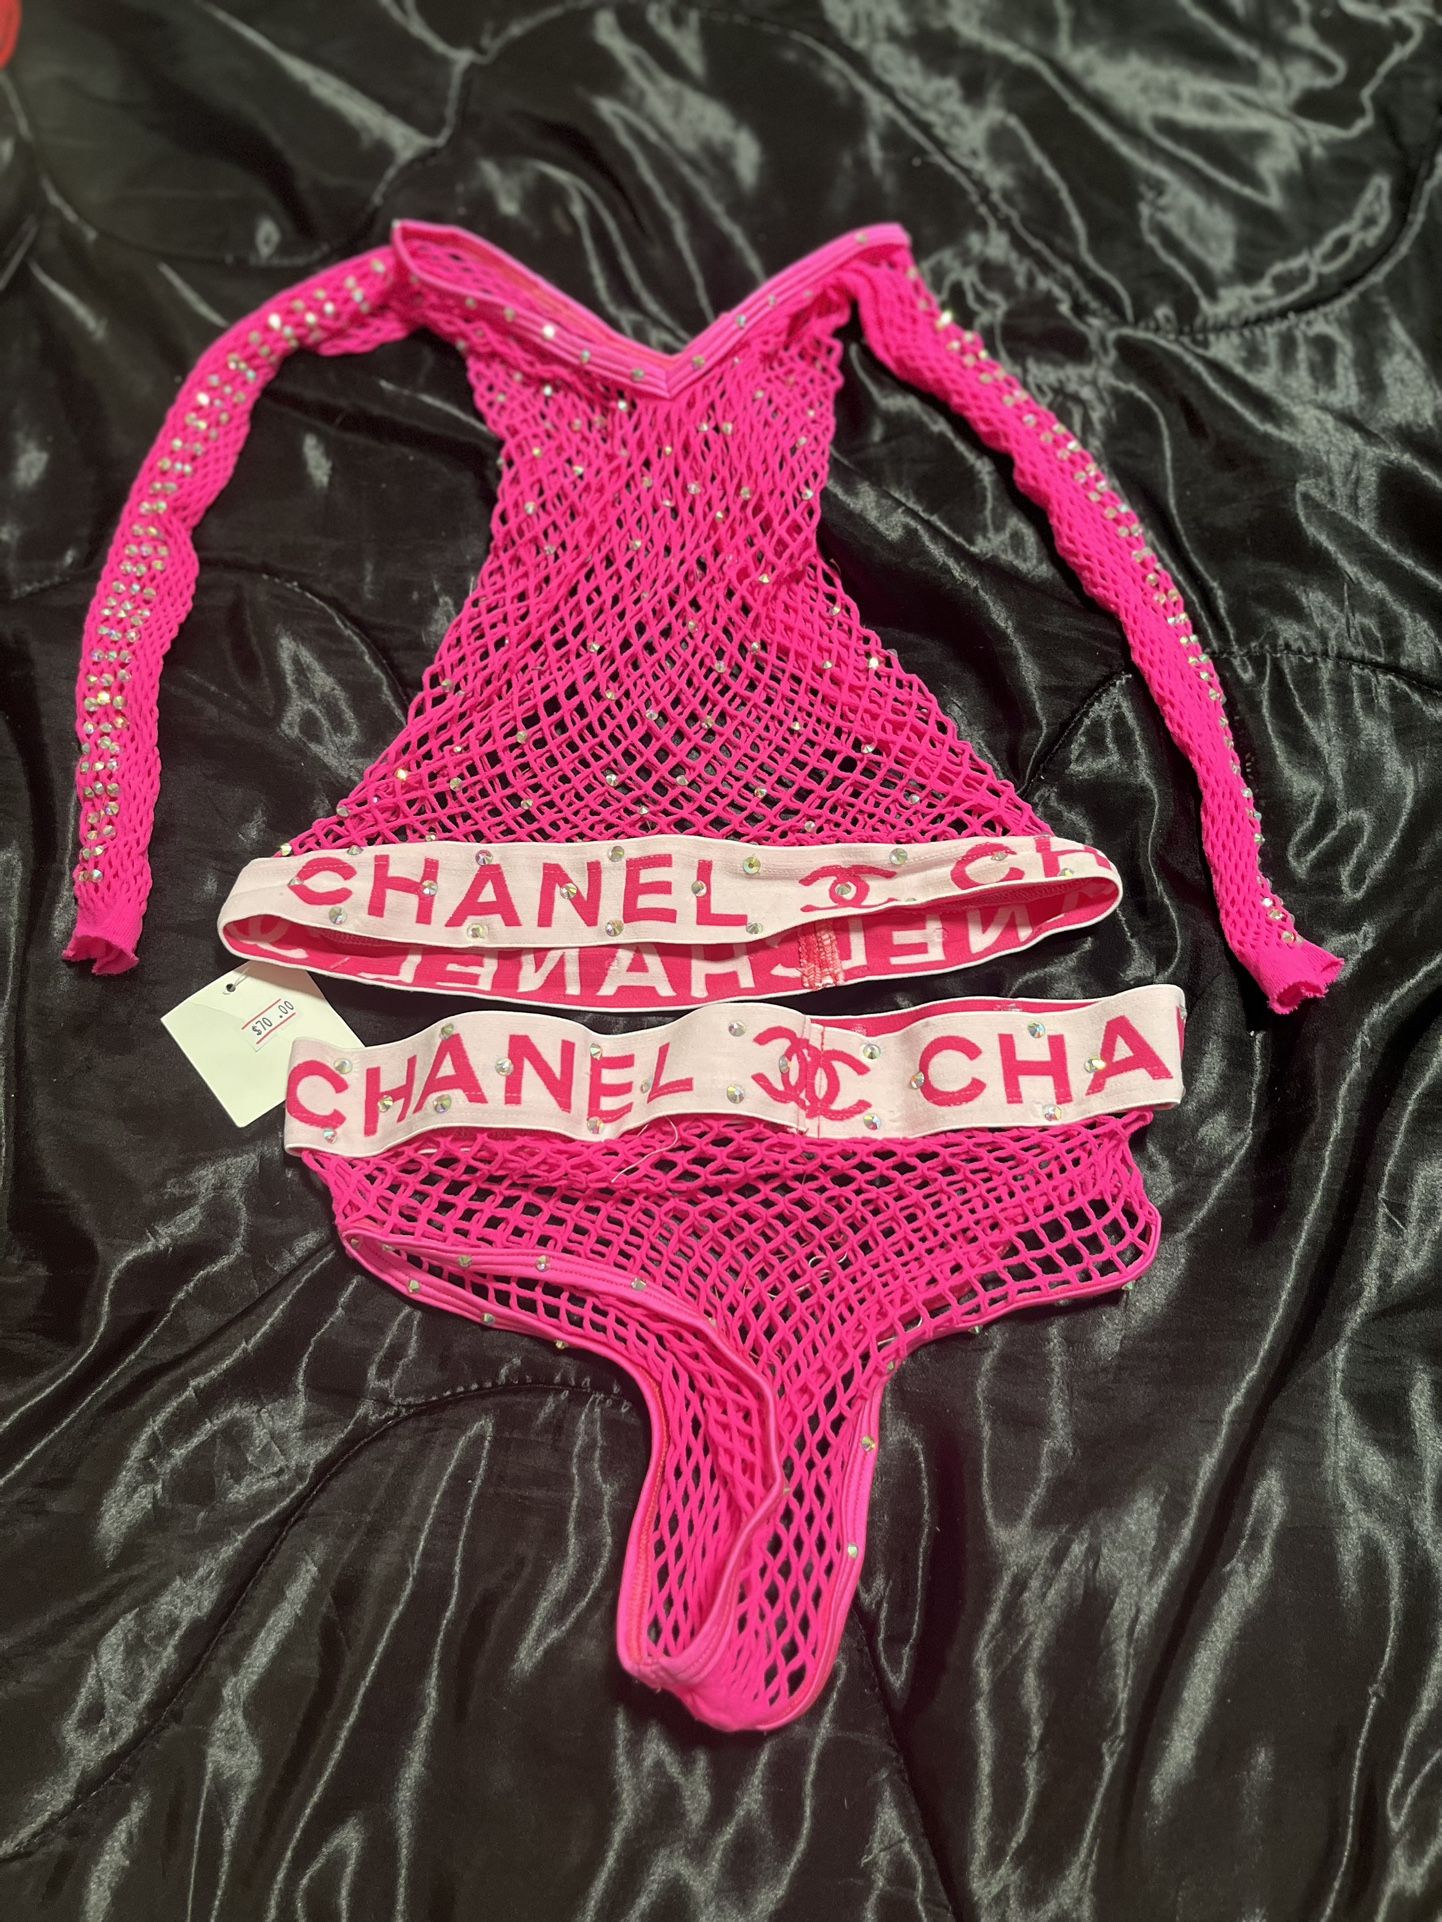 Two Piece “Chanel” Fishnet Outfit